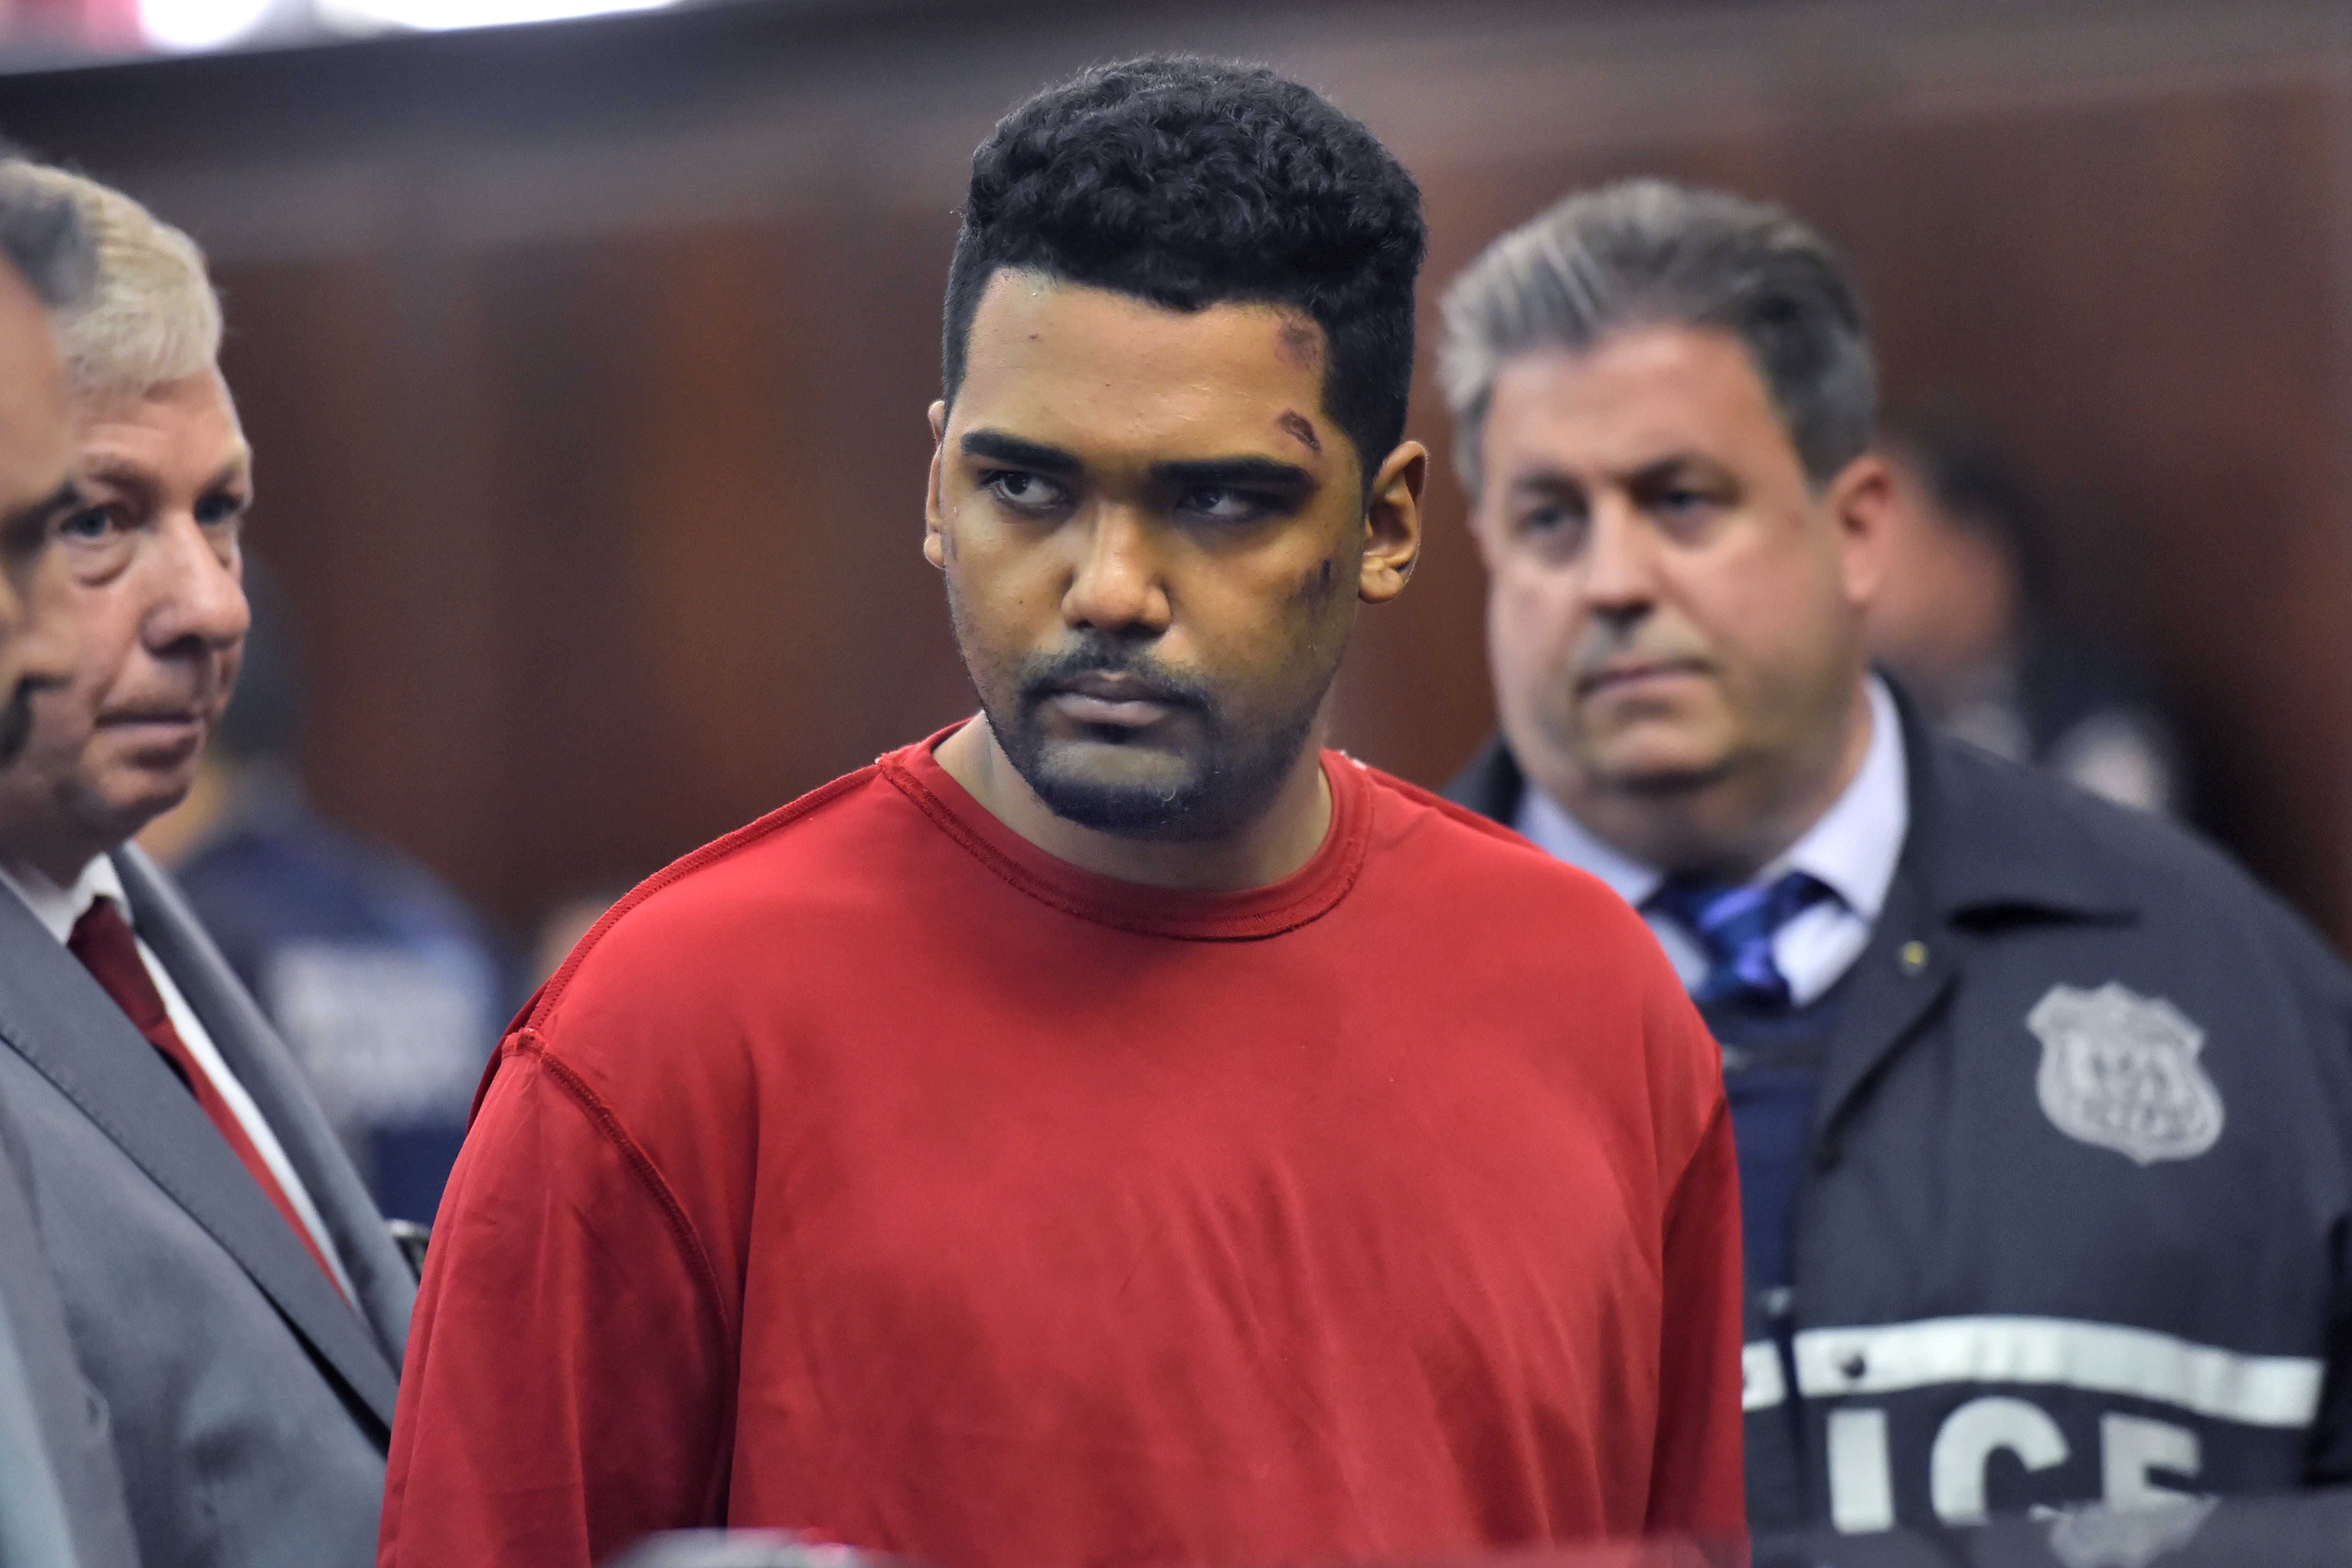 Prosecutors: Times Square driver wanted to ‘kill them all’